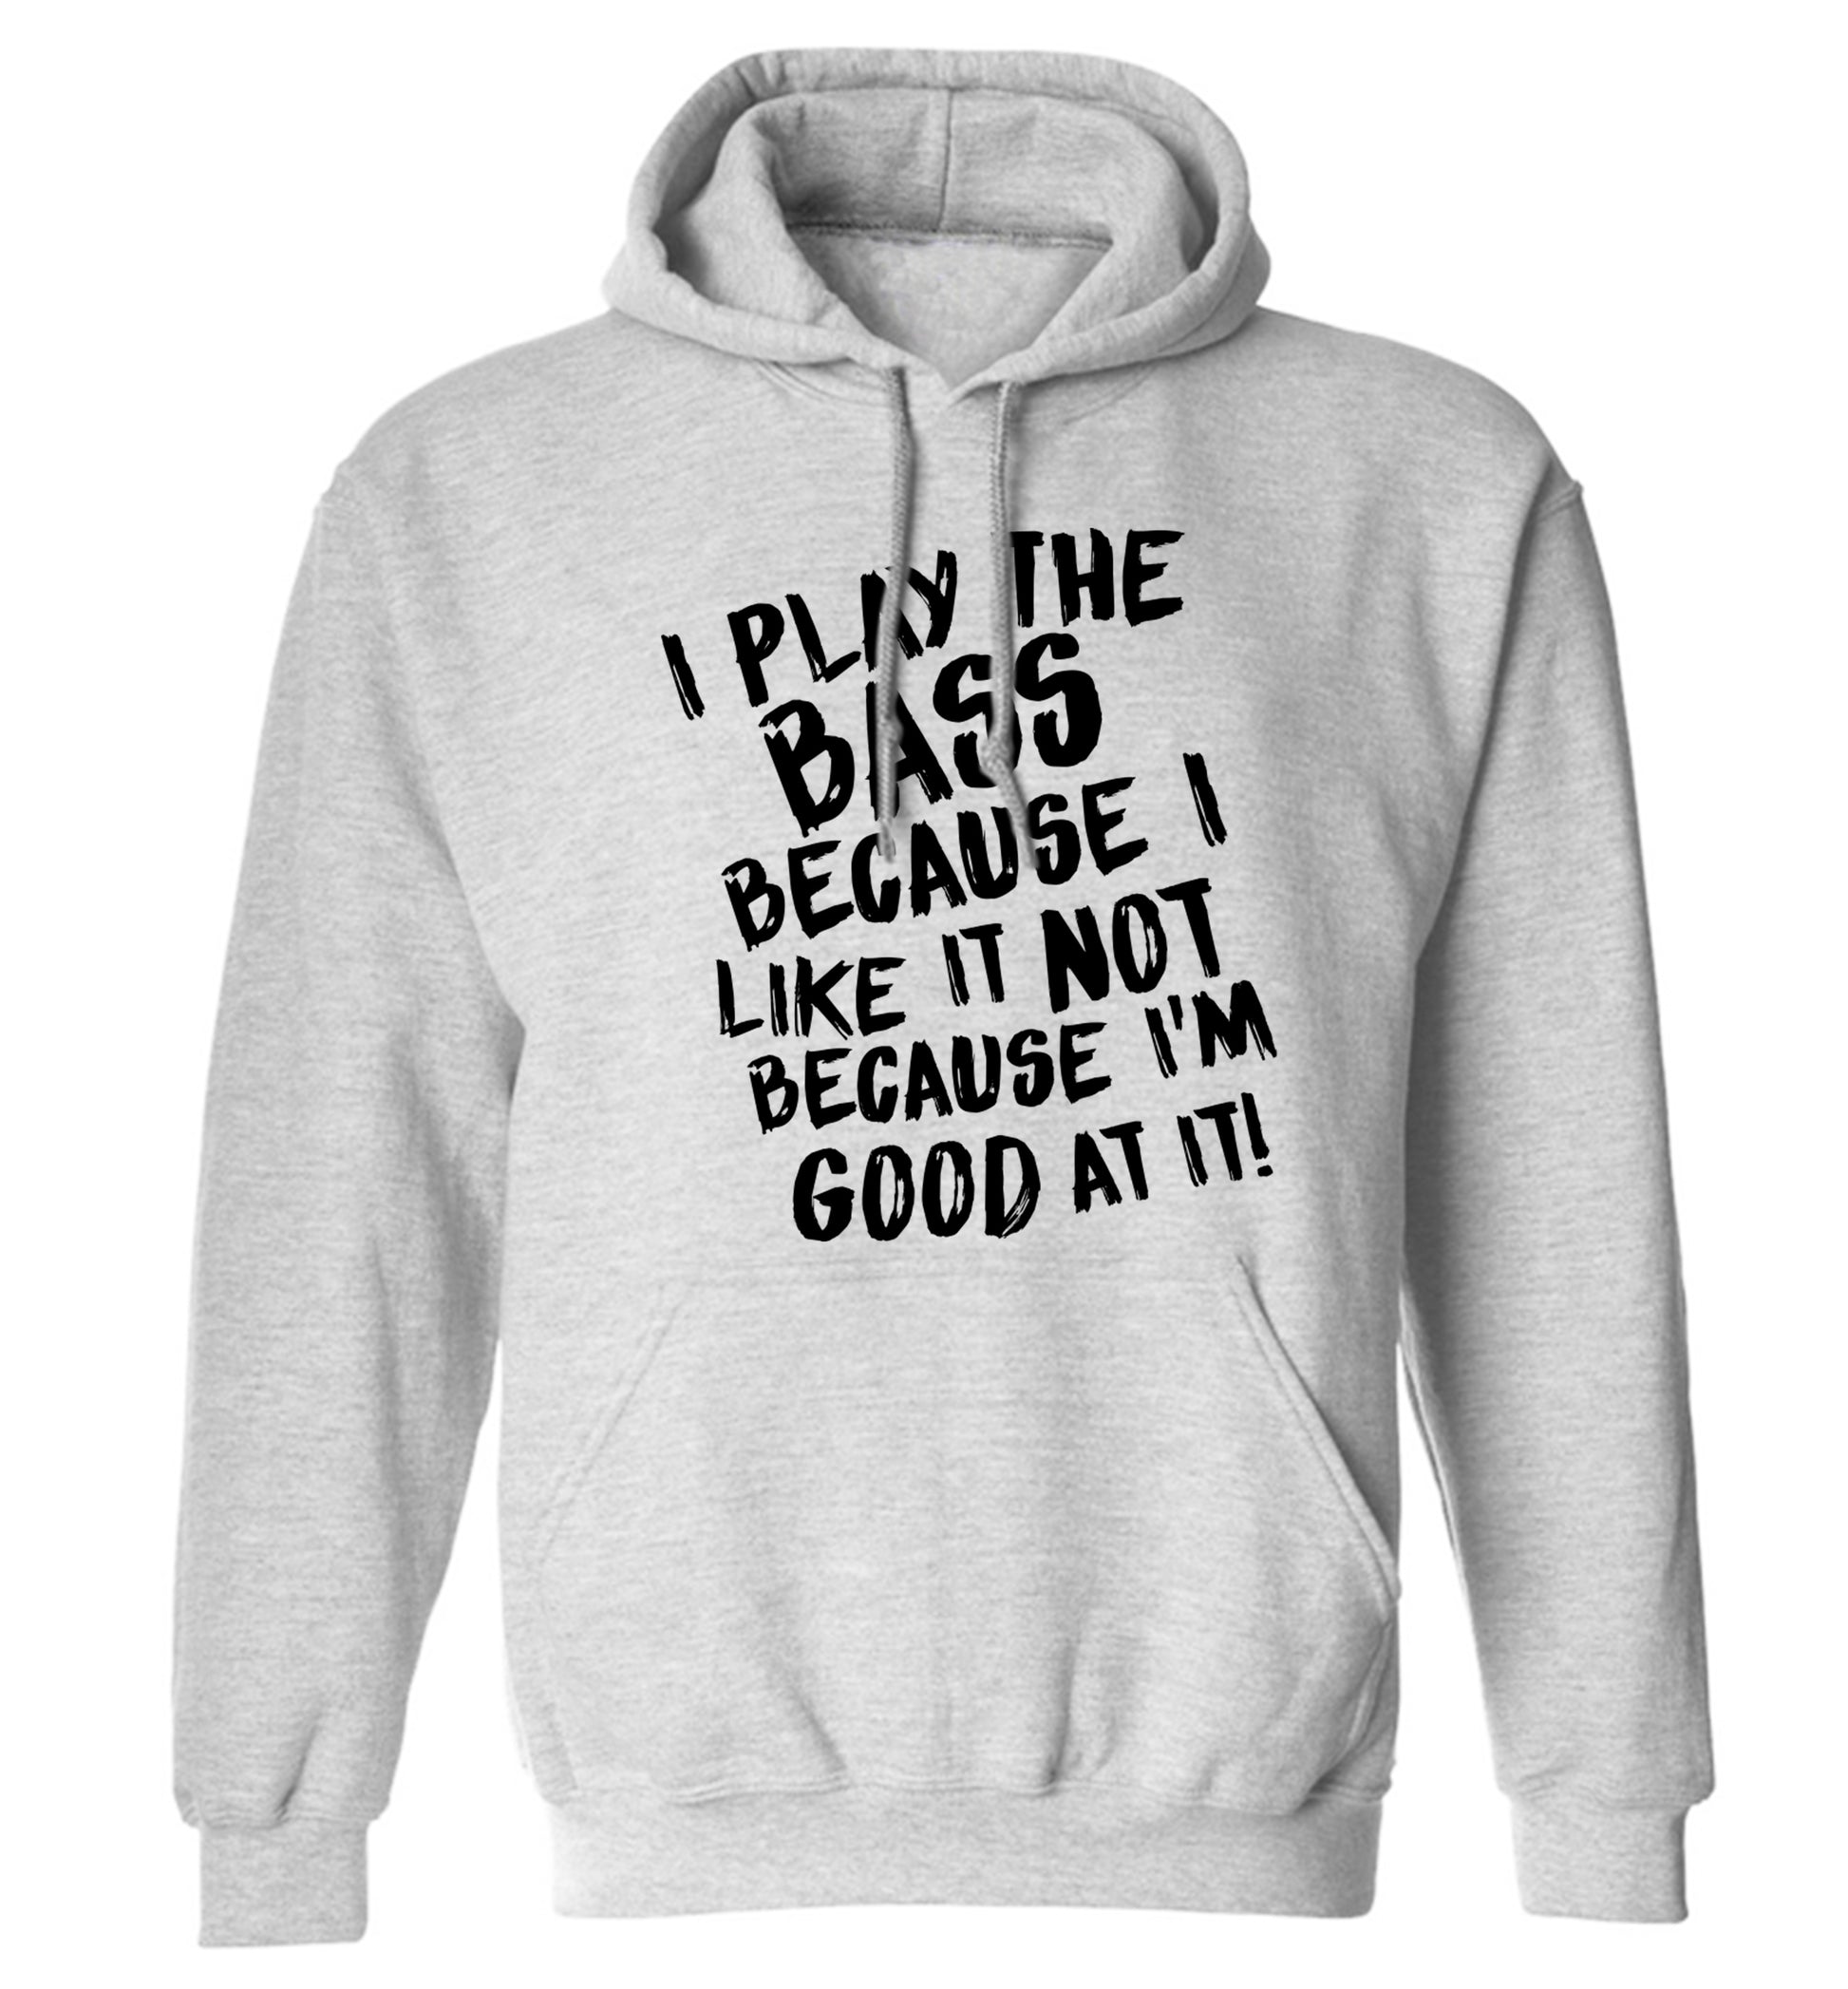 I play the bass because I like it not because I'm good at it adults unisex grey hoodie 2XL